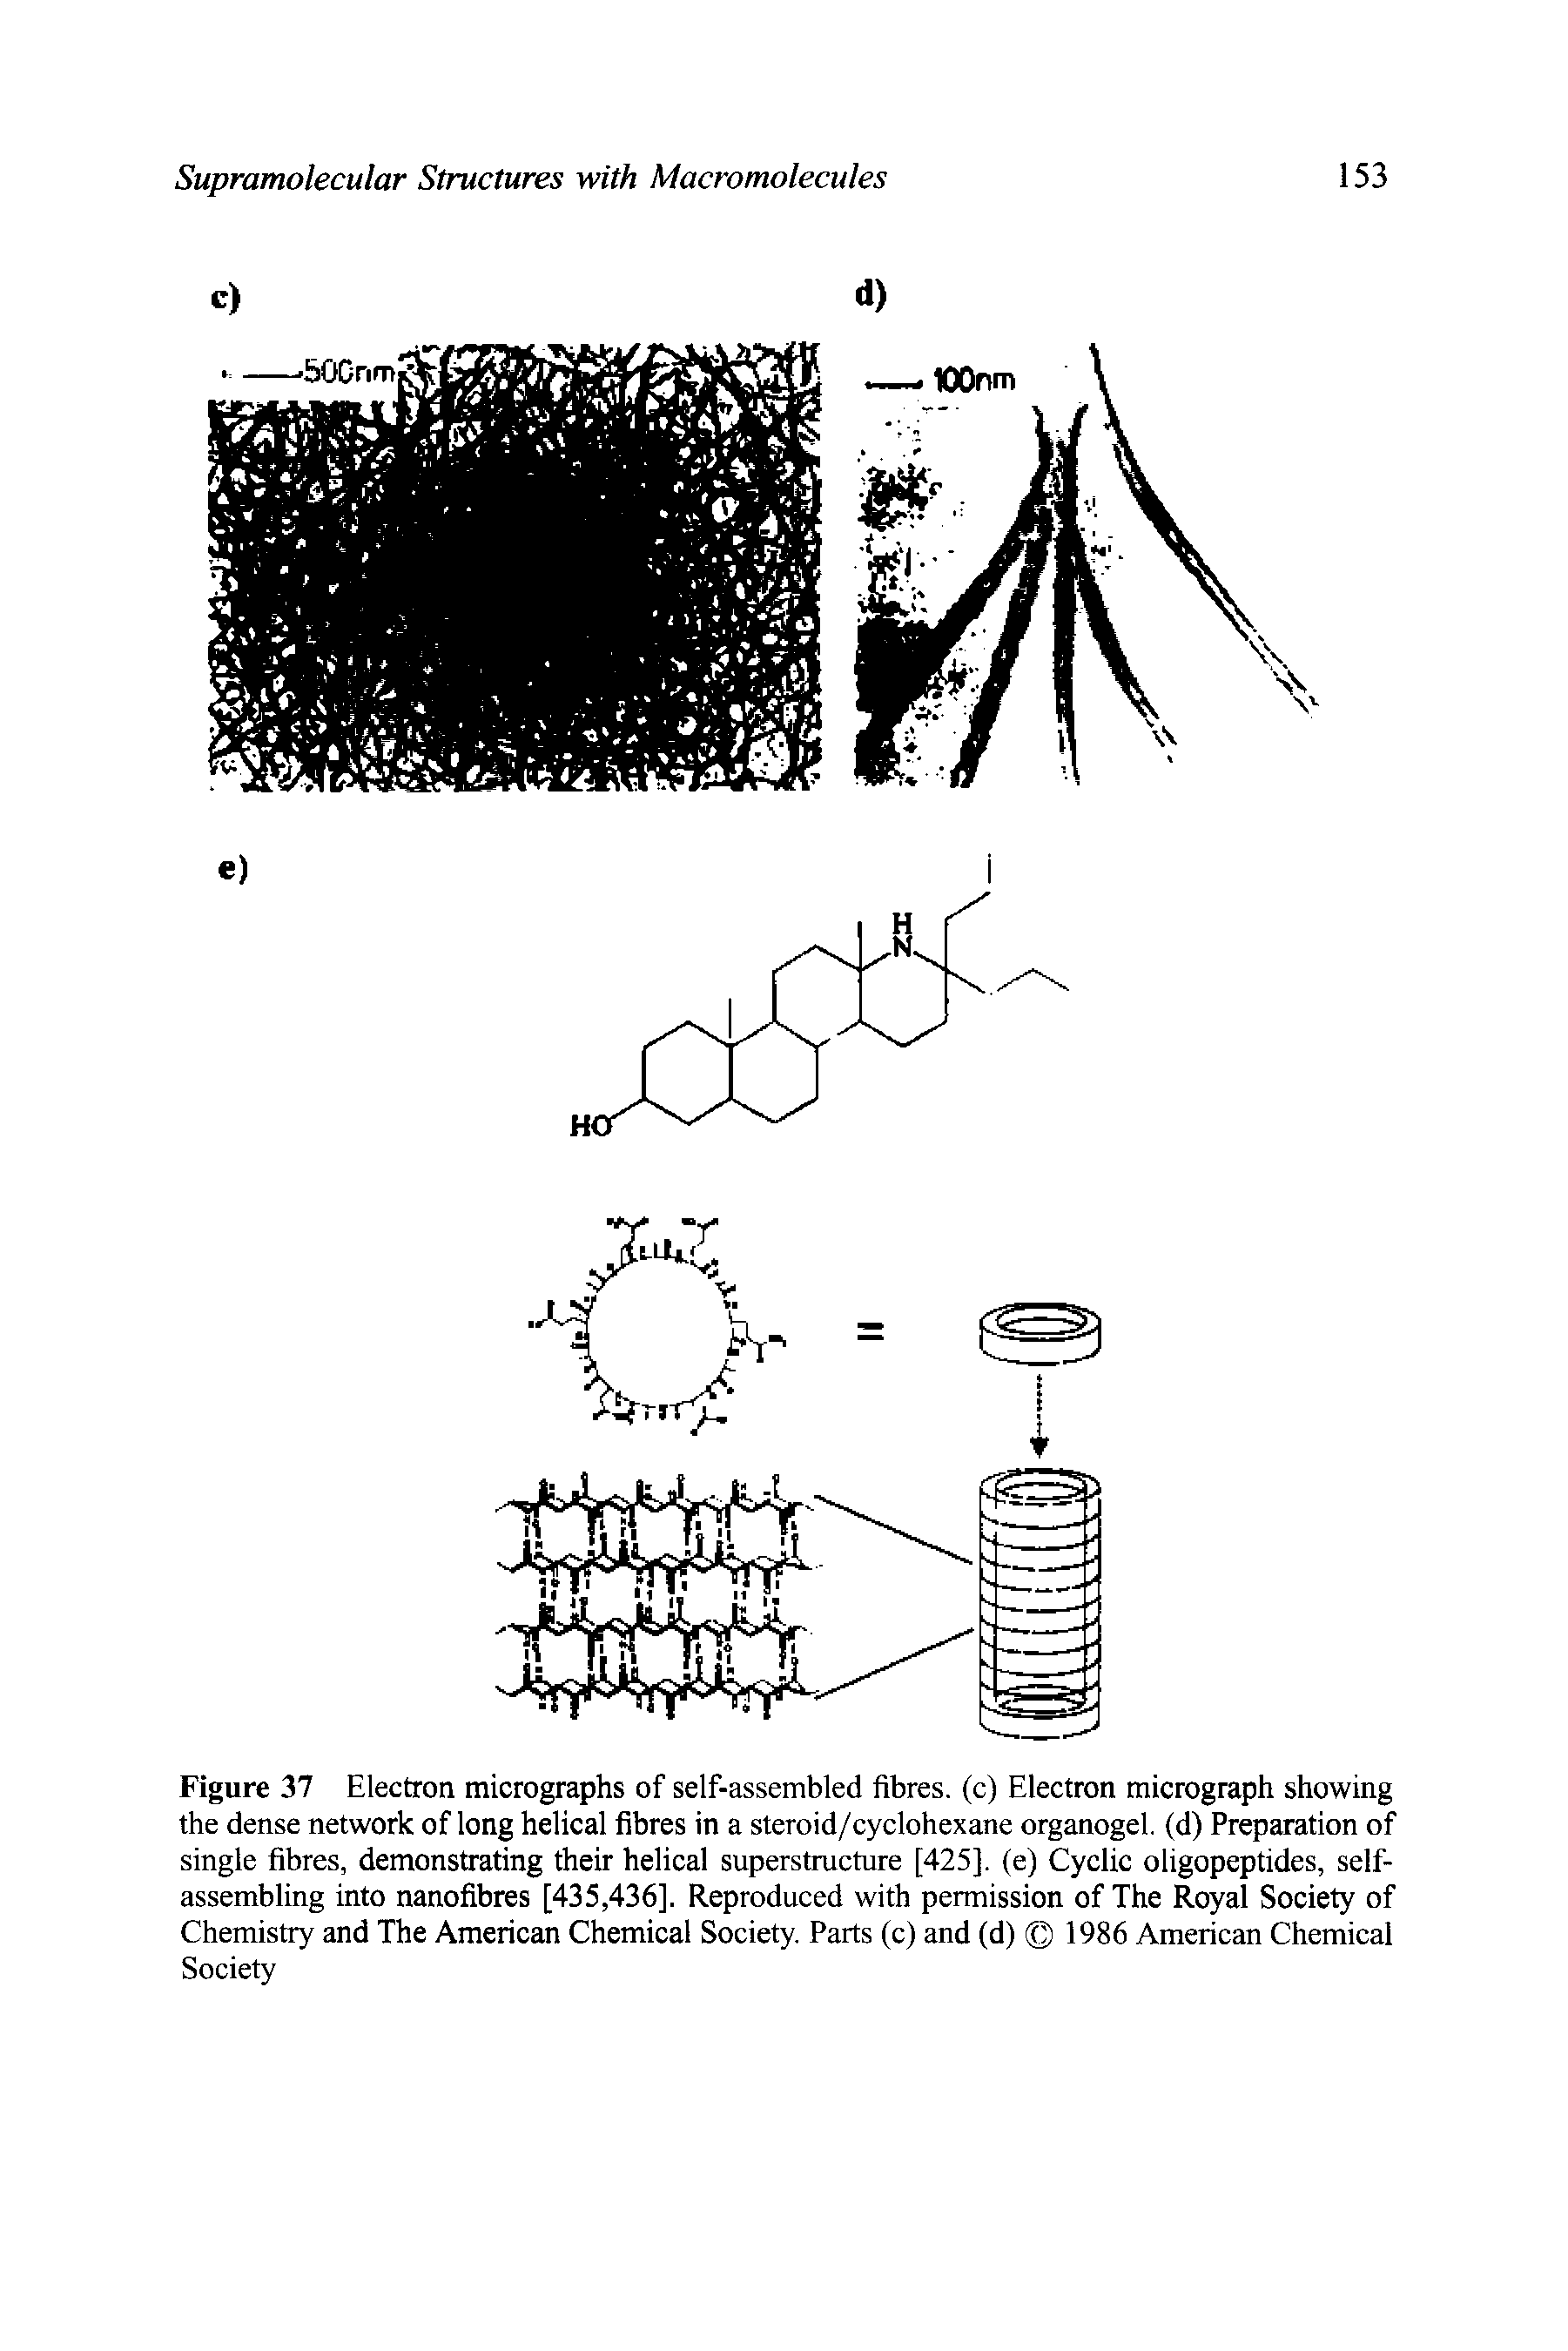 Figure 37 Electron micrographs of self-assembled fibres, (c) Electron micrograph showing the dense network of long helical fibres in a steroid/cyclohexane organogel, (d) Preparation of single fibres, demonstrating their helical superstructure [425]. (e) Cyclic oligopeptides, selfassembling into nanofibres [435,436], Reproduced with permission of The Royal Society of Chemistry and The American Chemical Society. Parts (c) and (d) 1986 American Chemical Society...